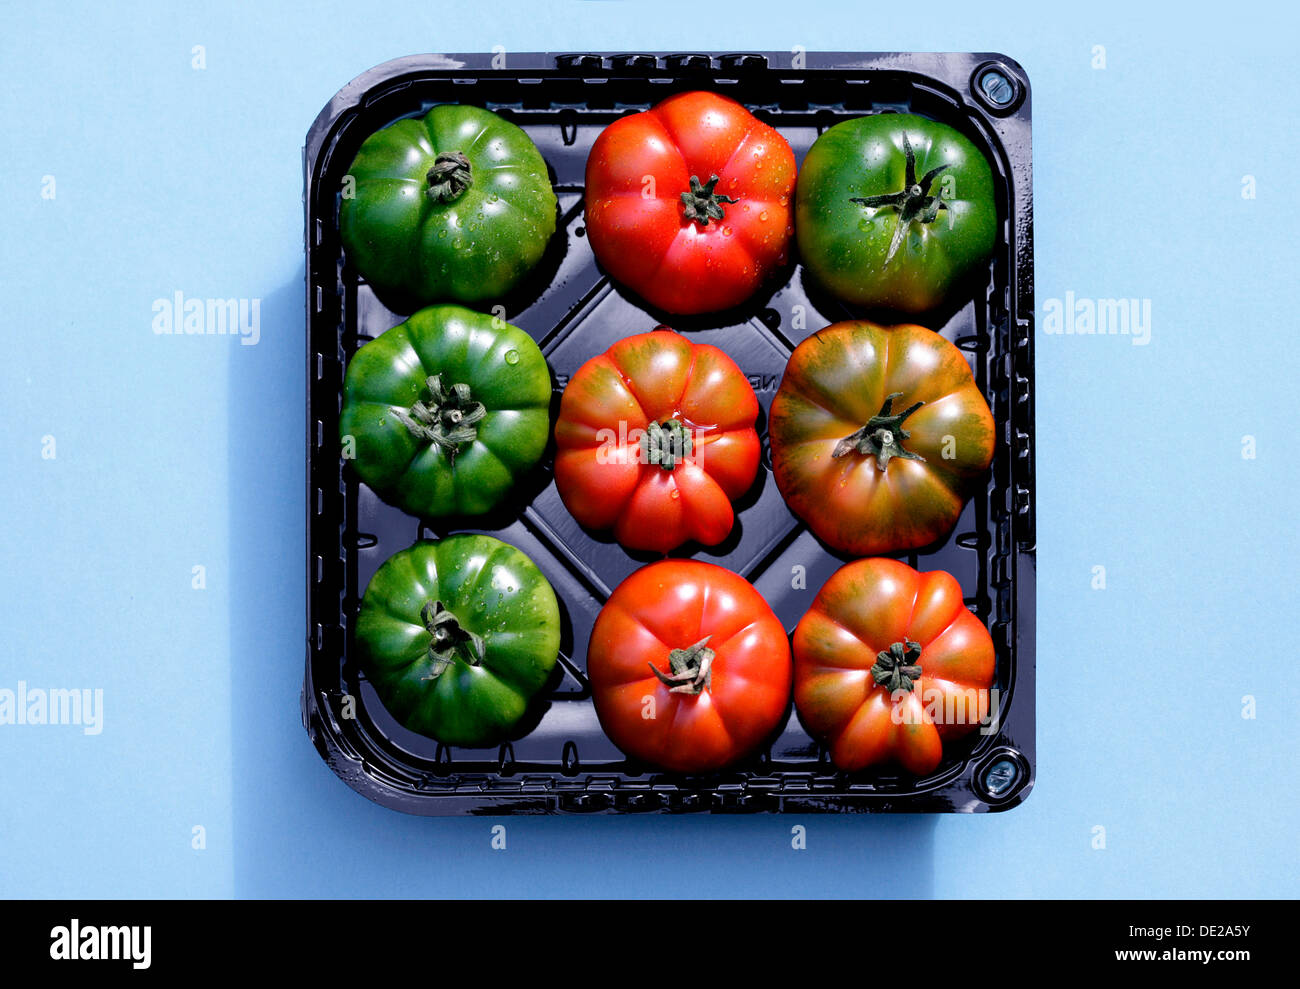 Red and green tomatoes in a black plastic tray Stock Photo